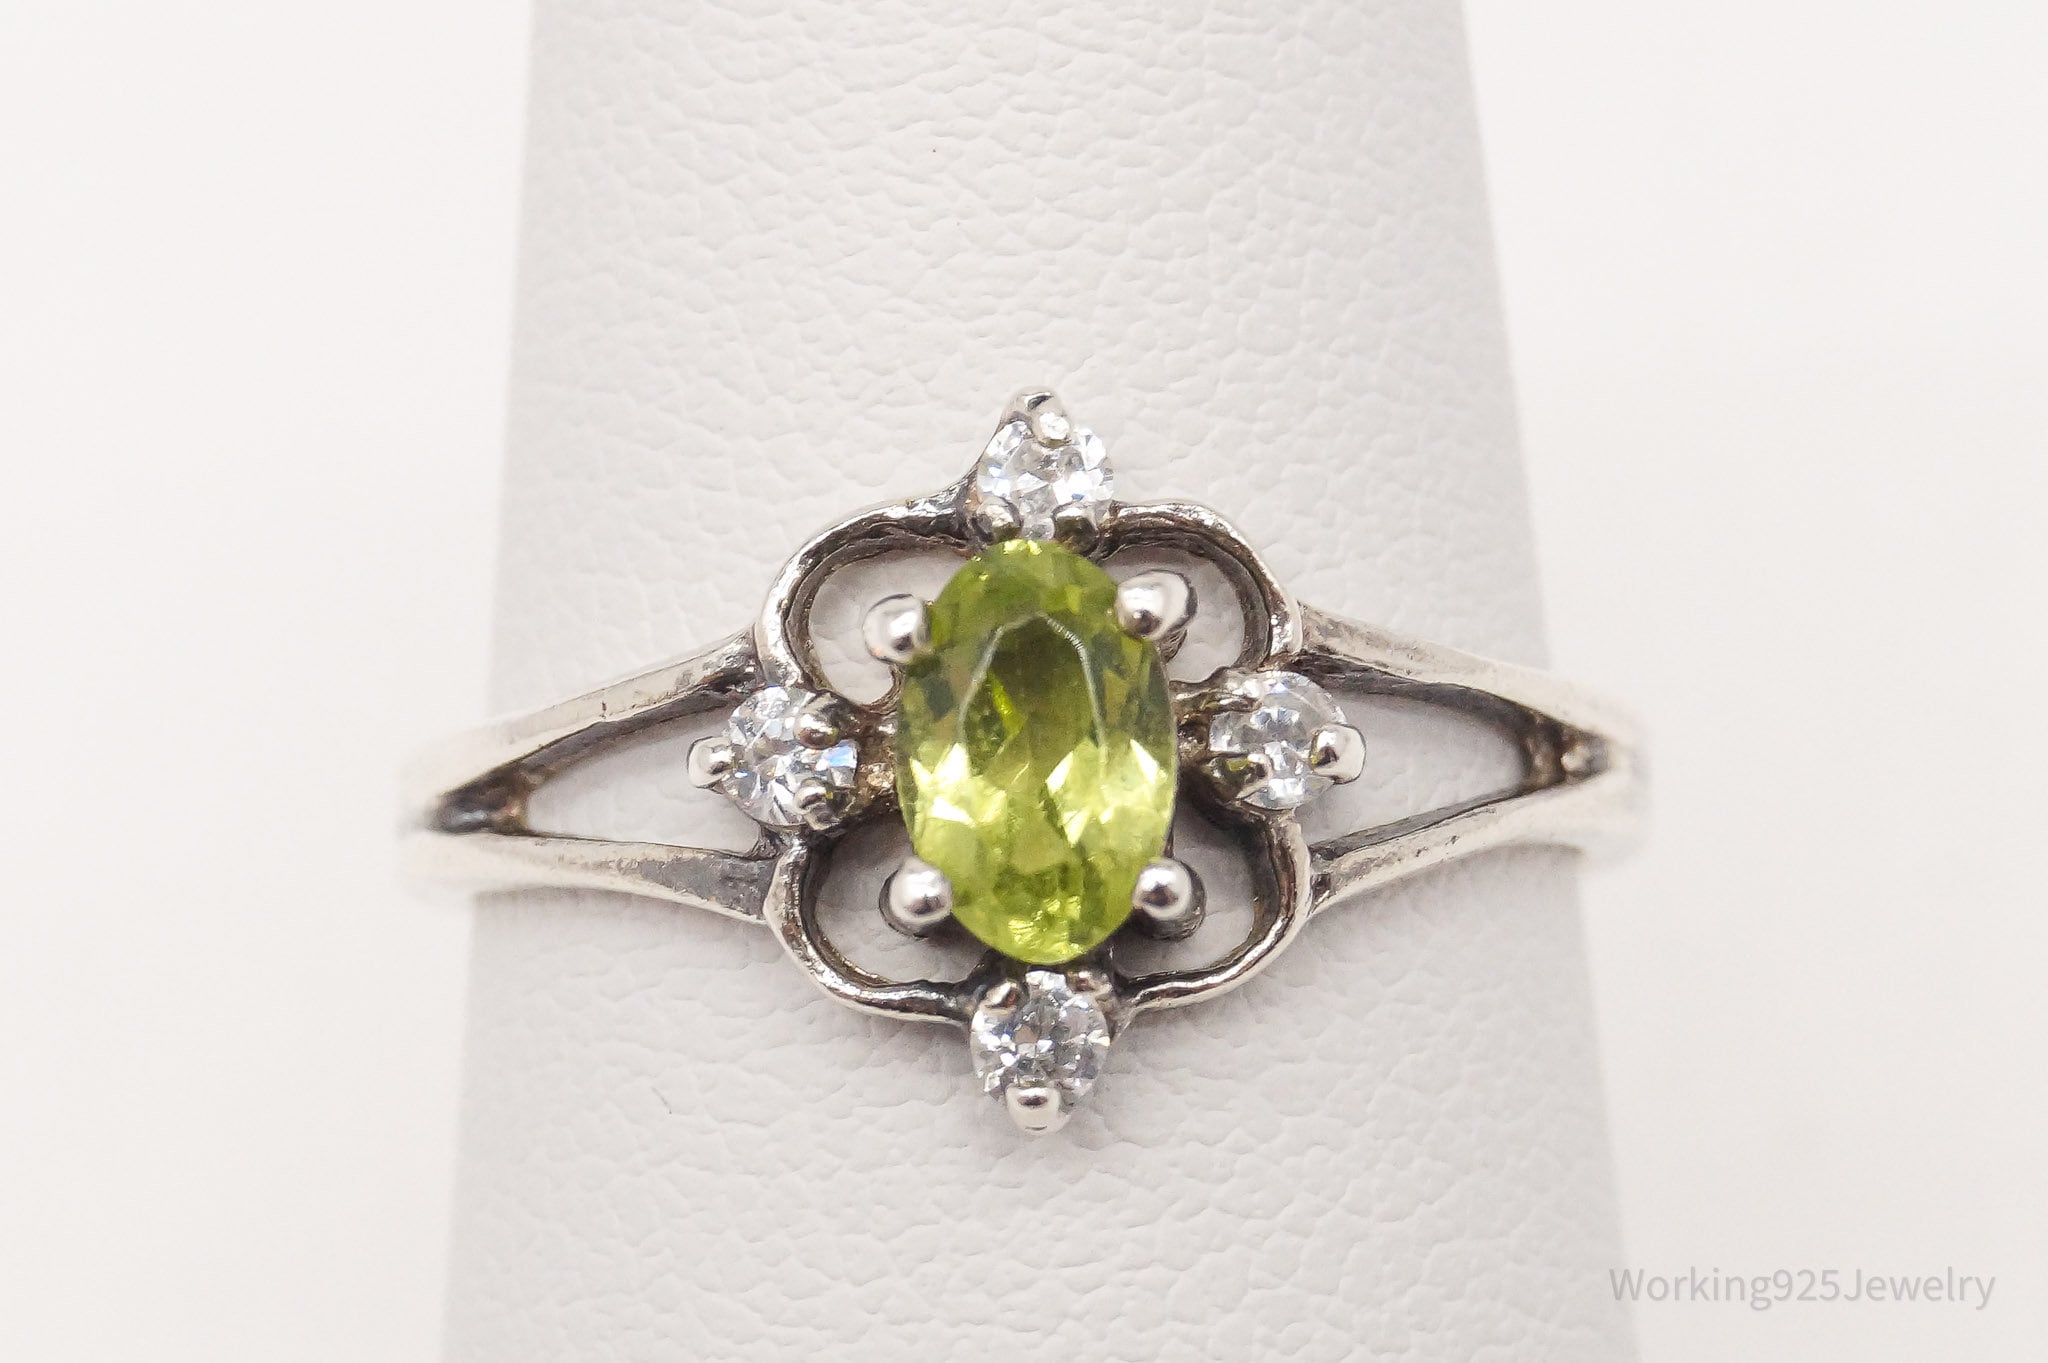 Vintage Peridot Cubic Zirconia Sterling Silver Ring - Size 7